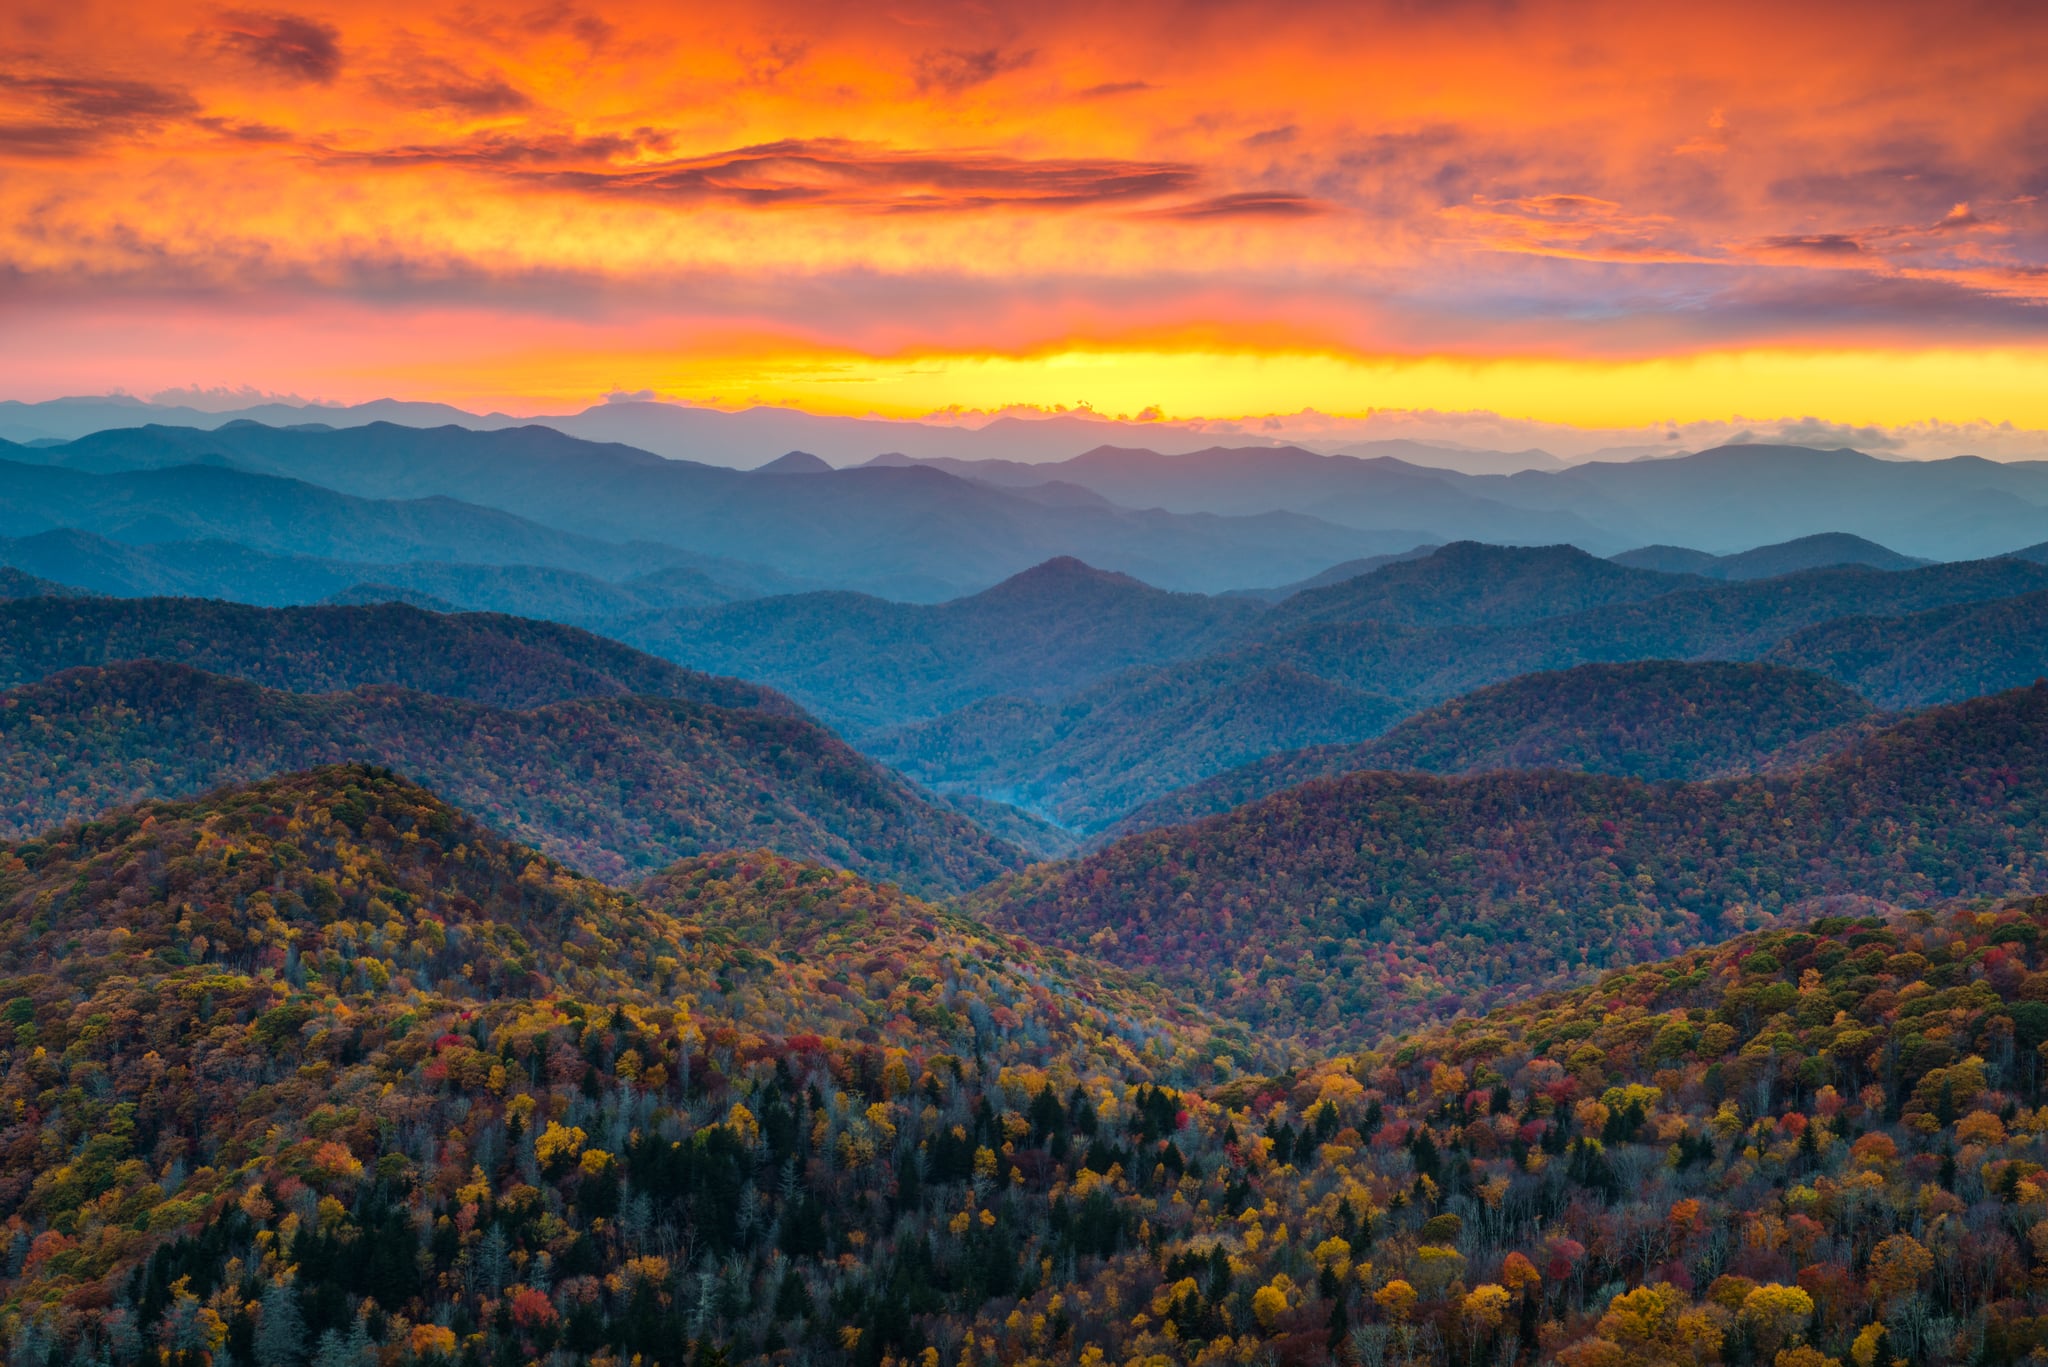 Cherokee, NC 21 Places to See the Most Spectacular Fall Foliage in